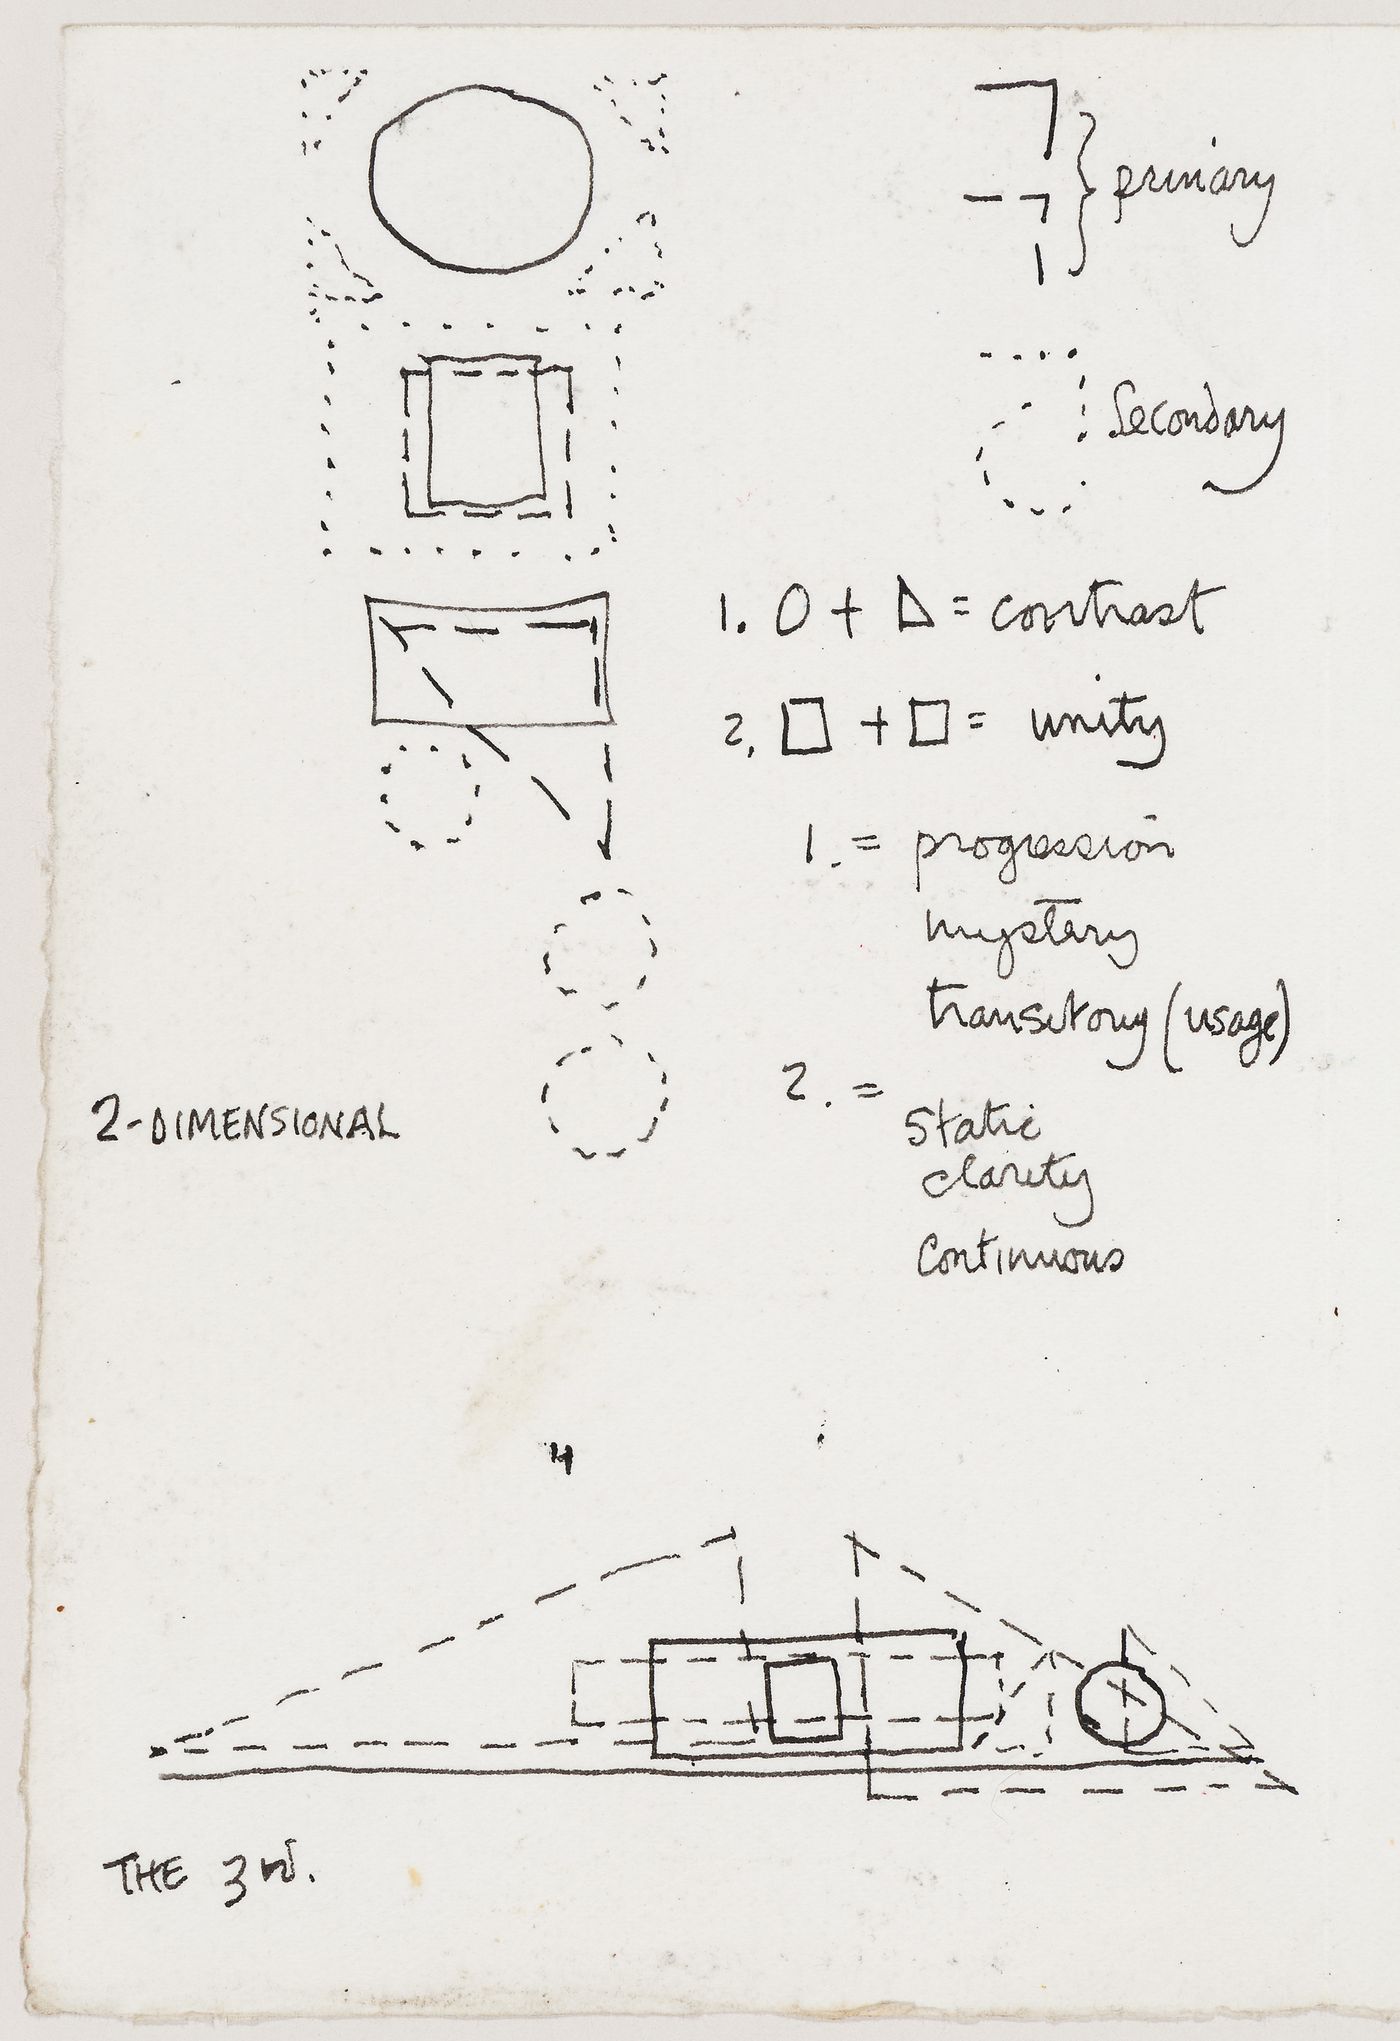 Perthut House: conceptual sketches and notes